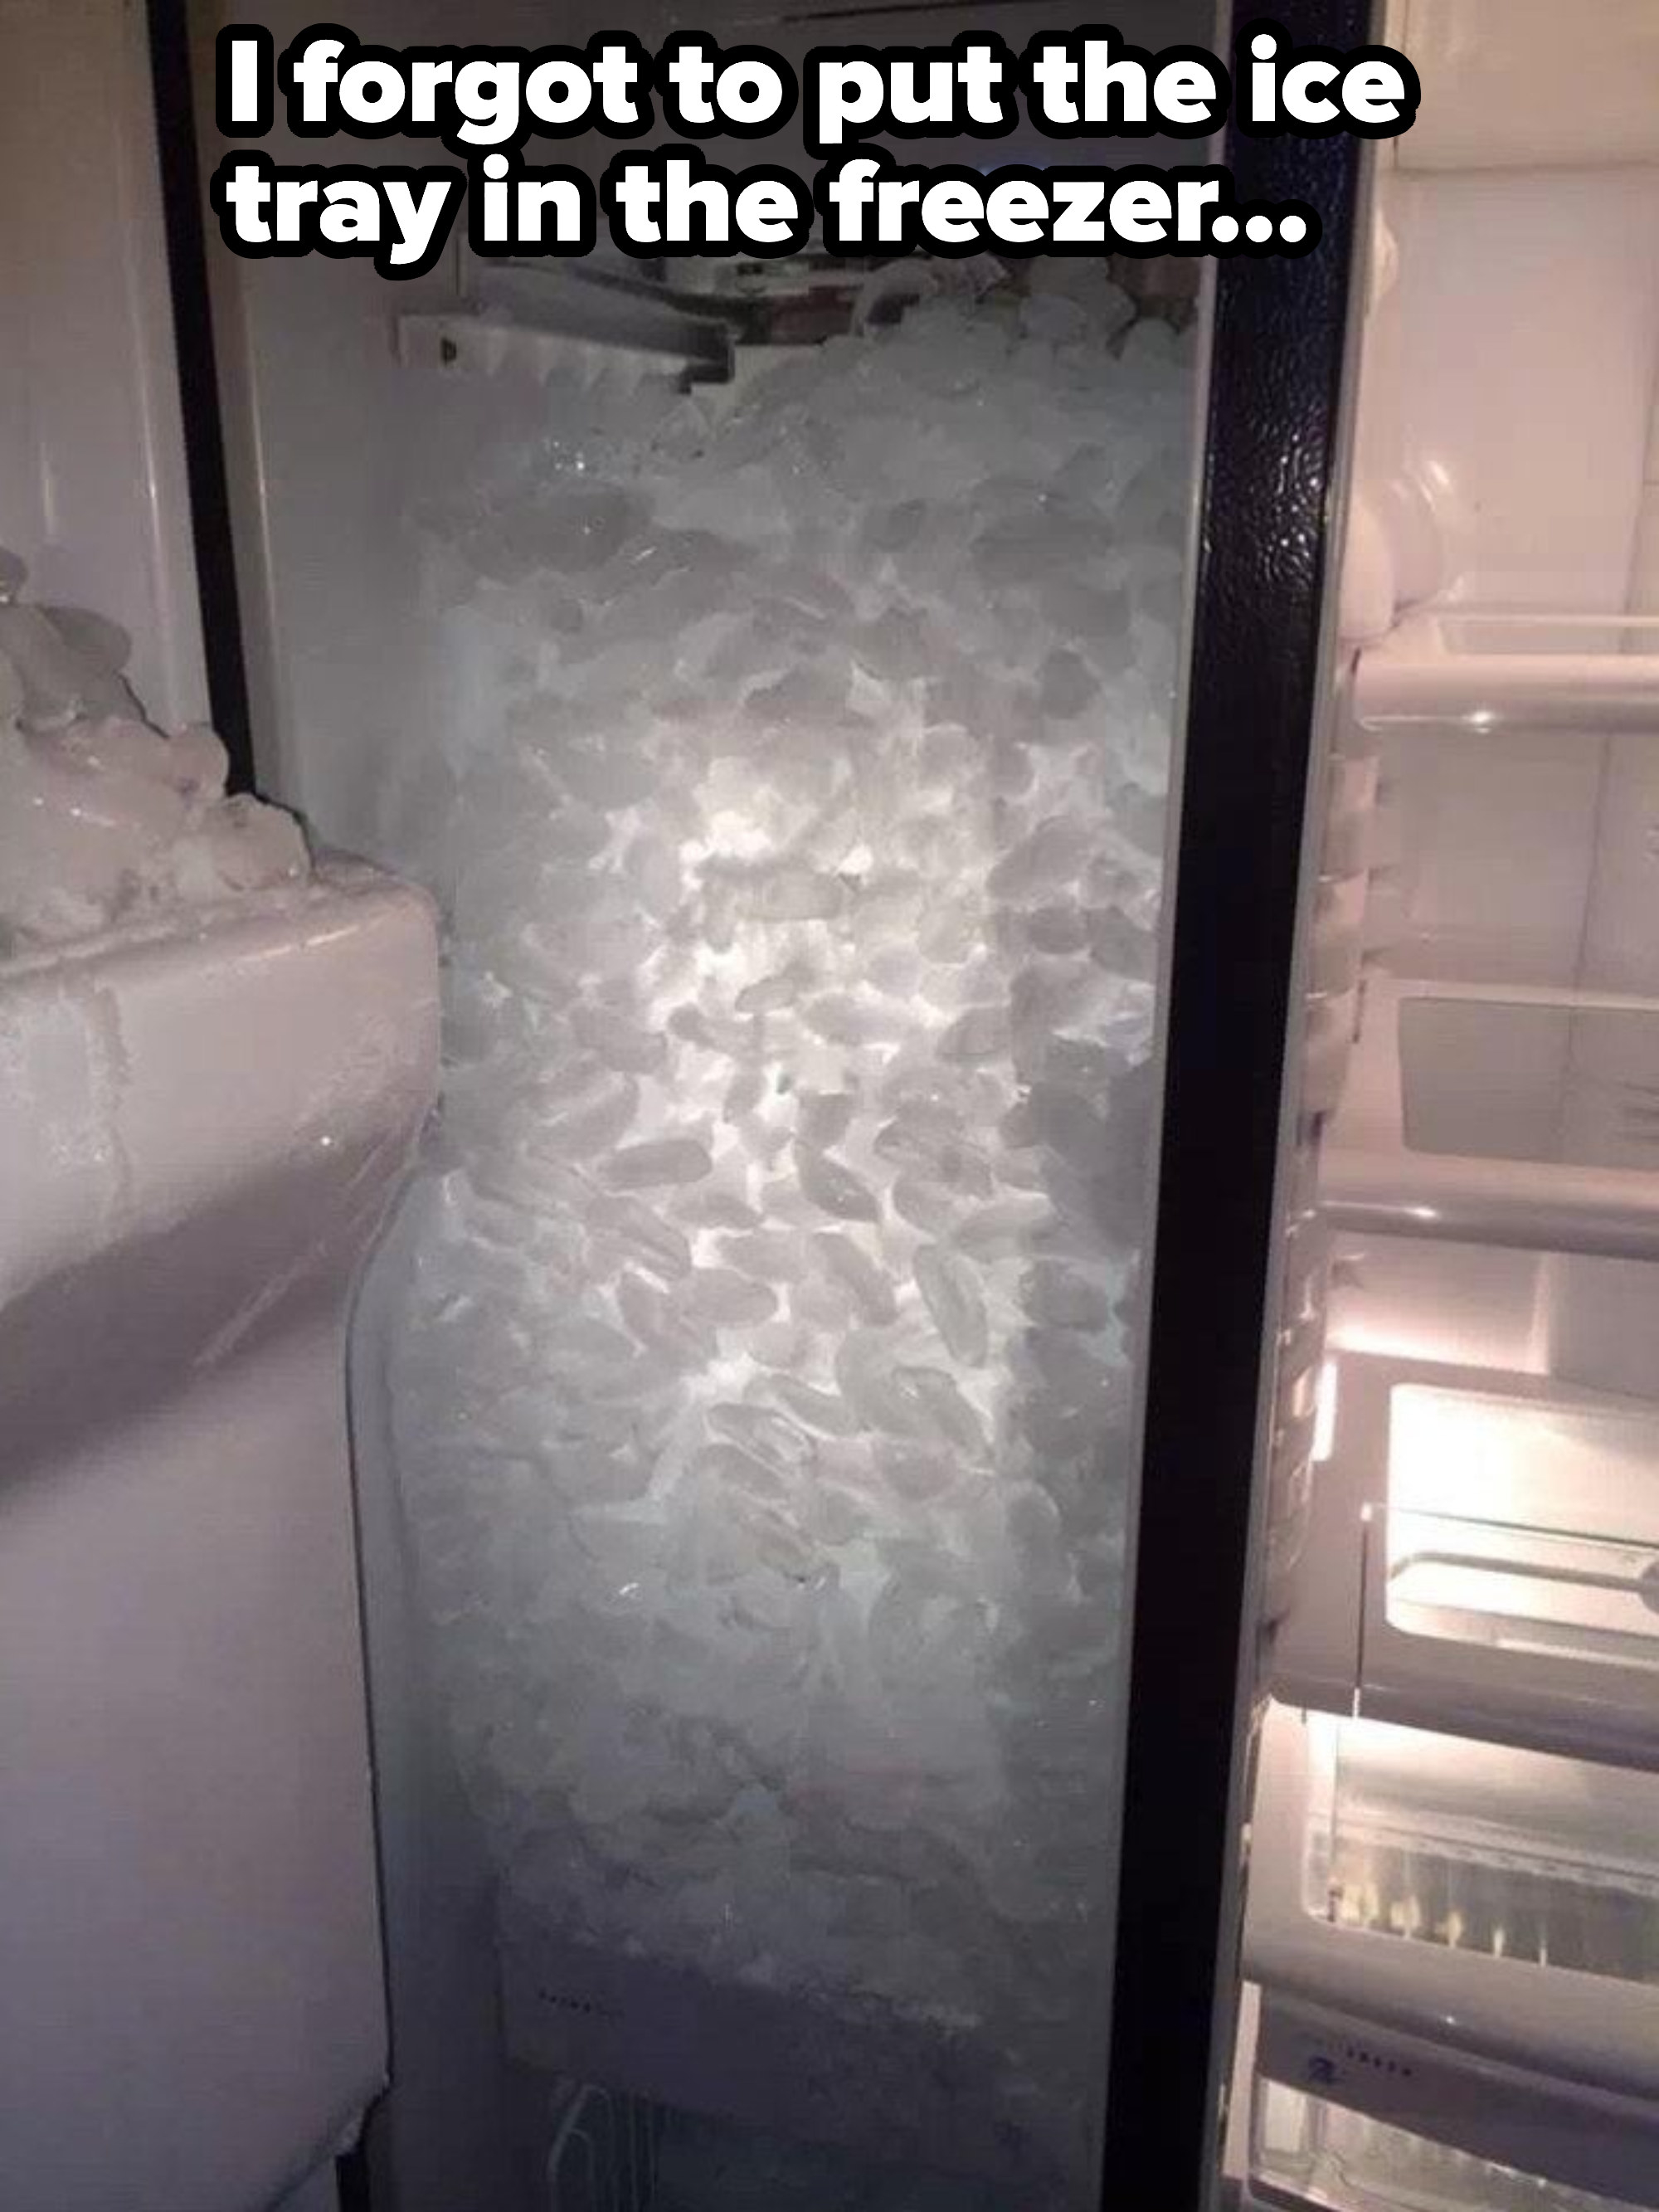 An ice-maker with ice up to the top, with caption &quot;I forgot to put the ice tray in the freezer&quot;